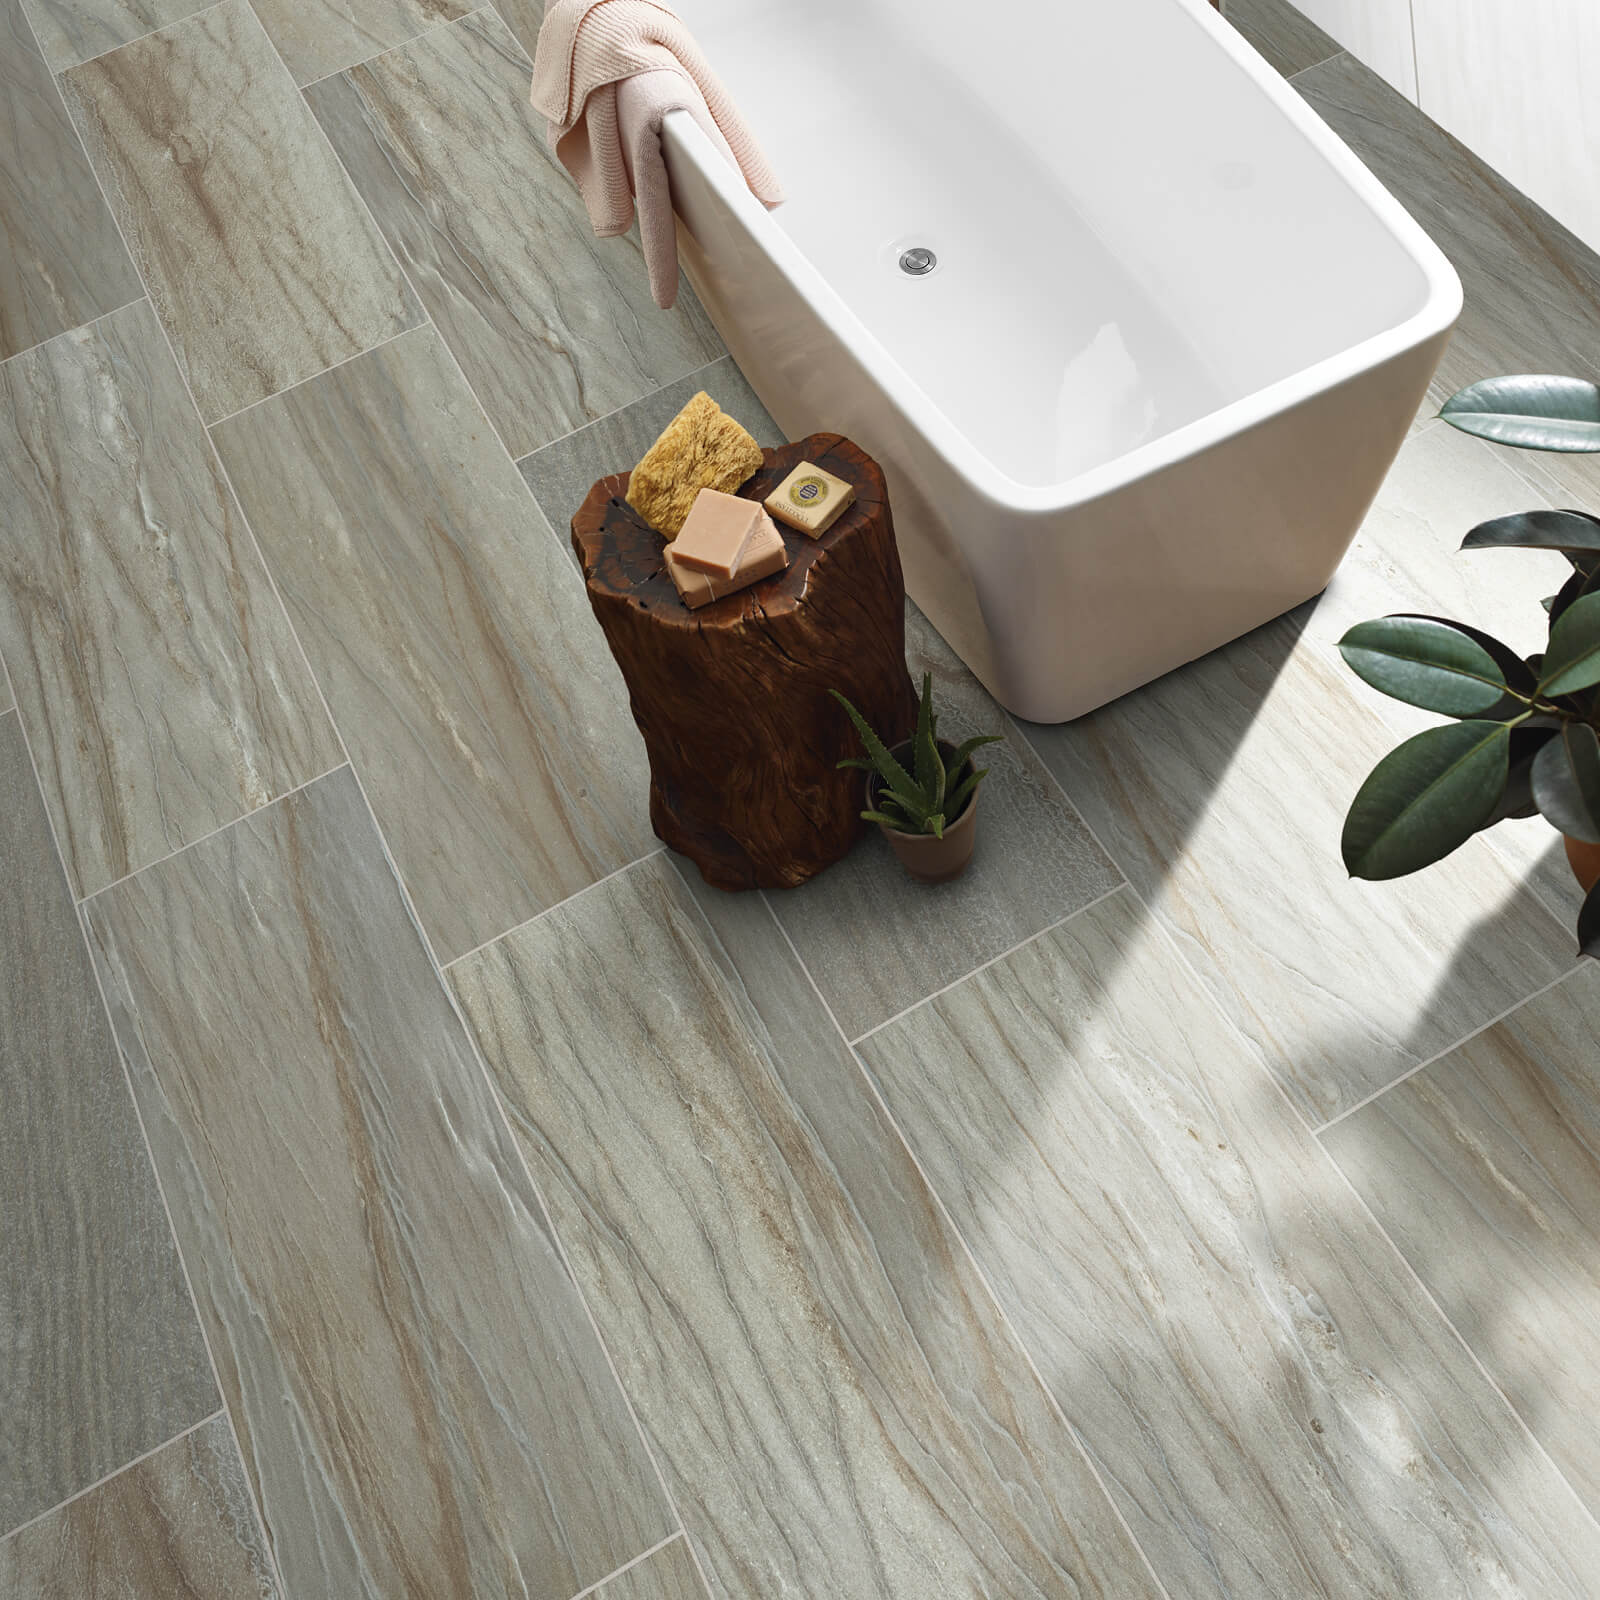 Tile and tub | The Carpet Gallery